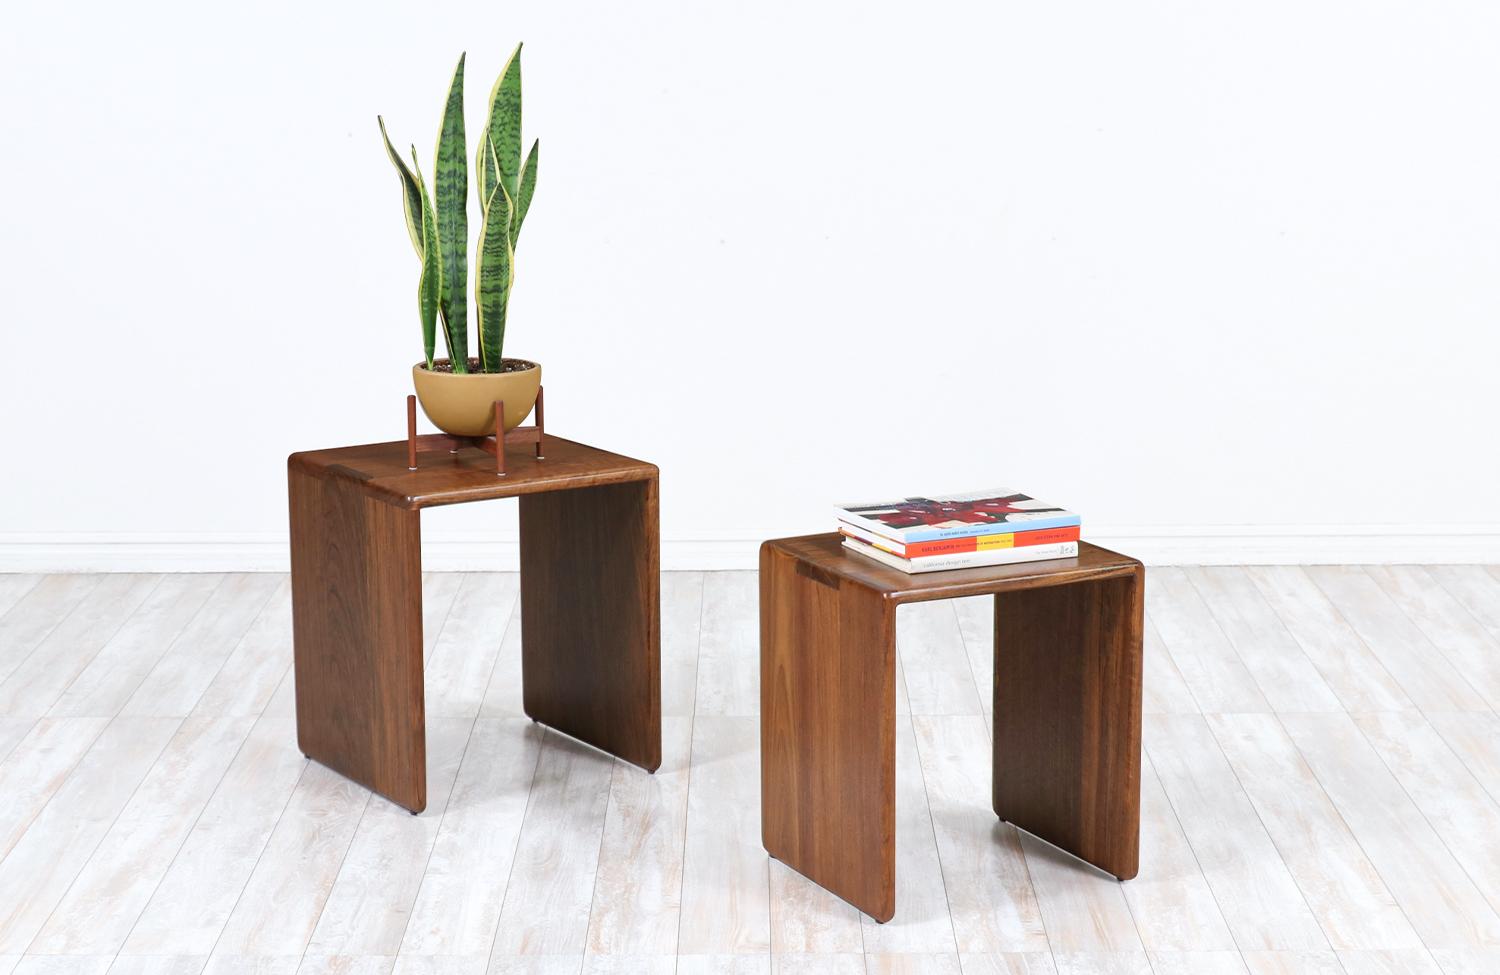 Gerald McCabe cube nesting side tables for orange crate modern

Dimensions:
Large 20in H x 17.75in W x 17.25in D

Small 18.75in H x 16.50in W x 15.50in D.